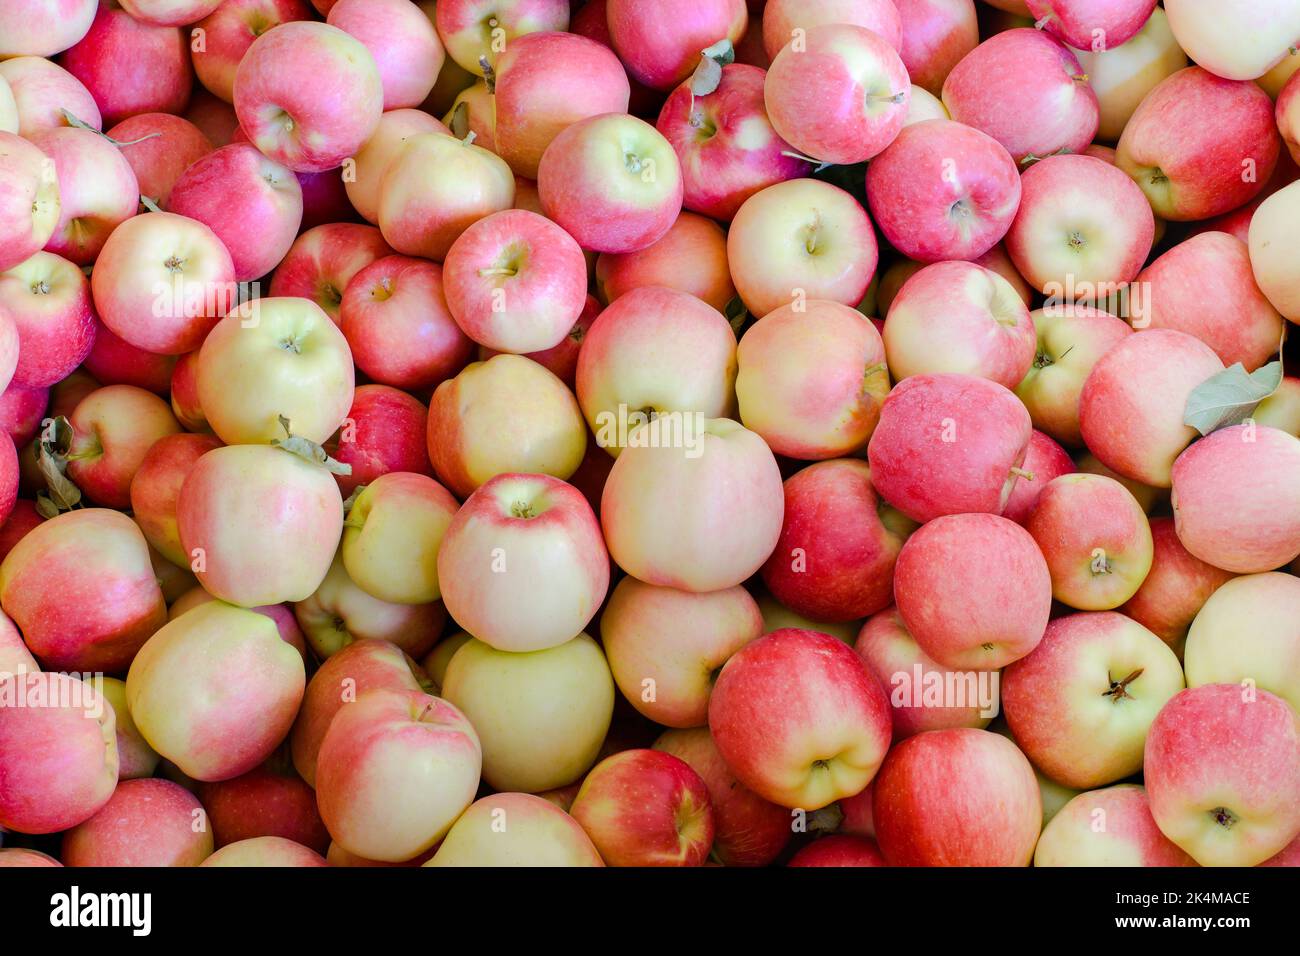 Large mass of Washington Ambrosia apples freshly picked in preparation for distribution to retailers Stock Photo